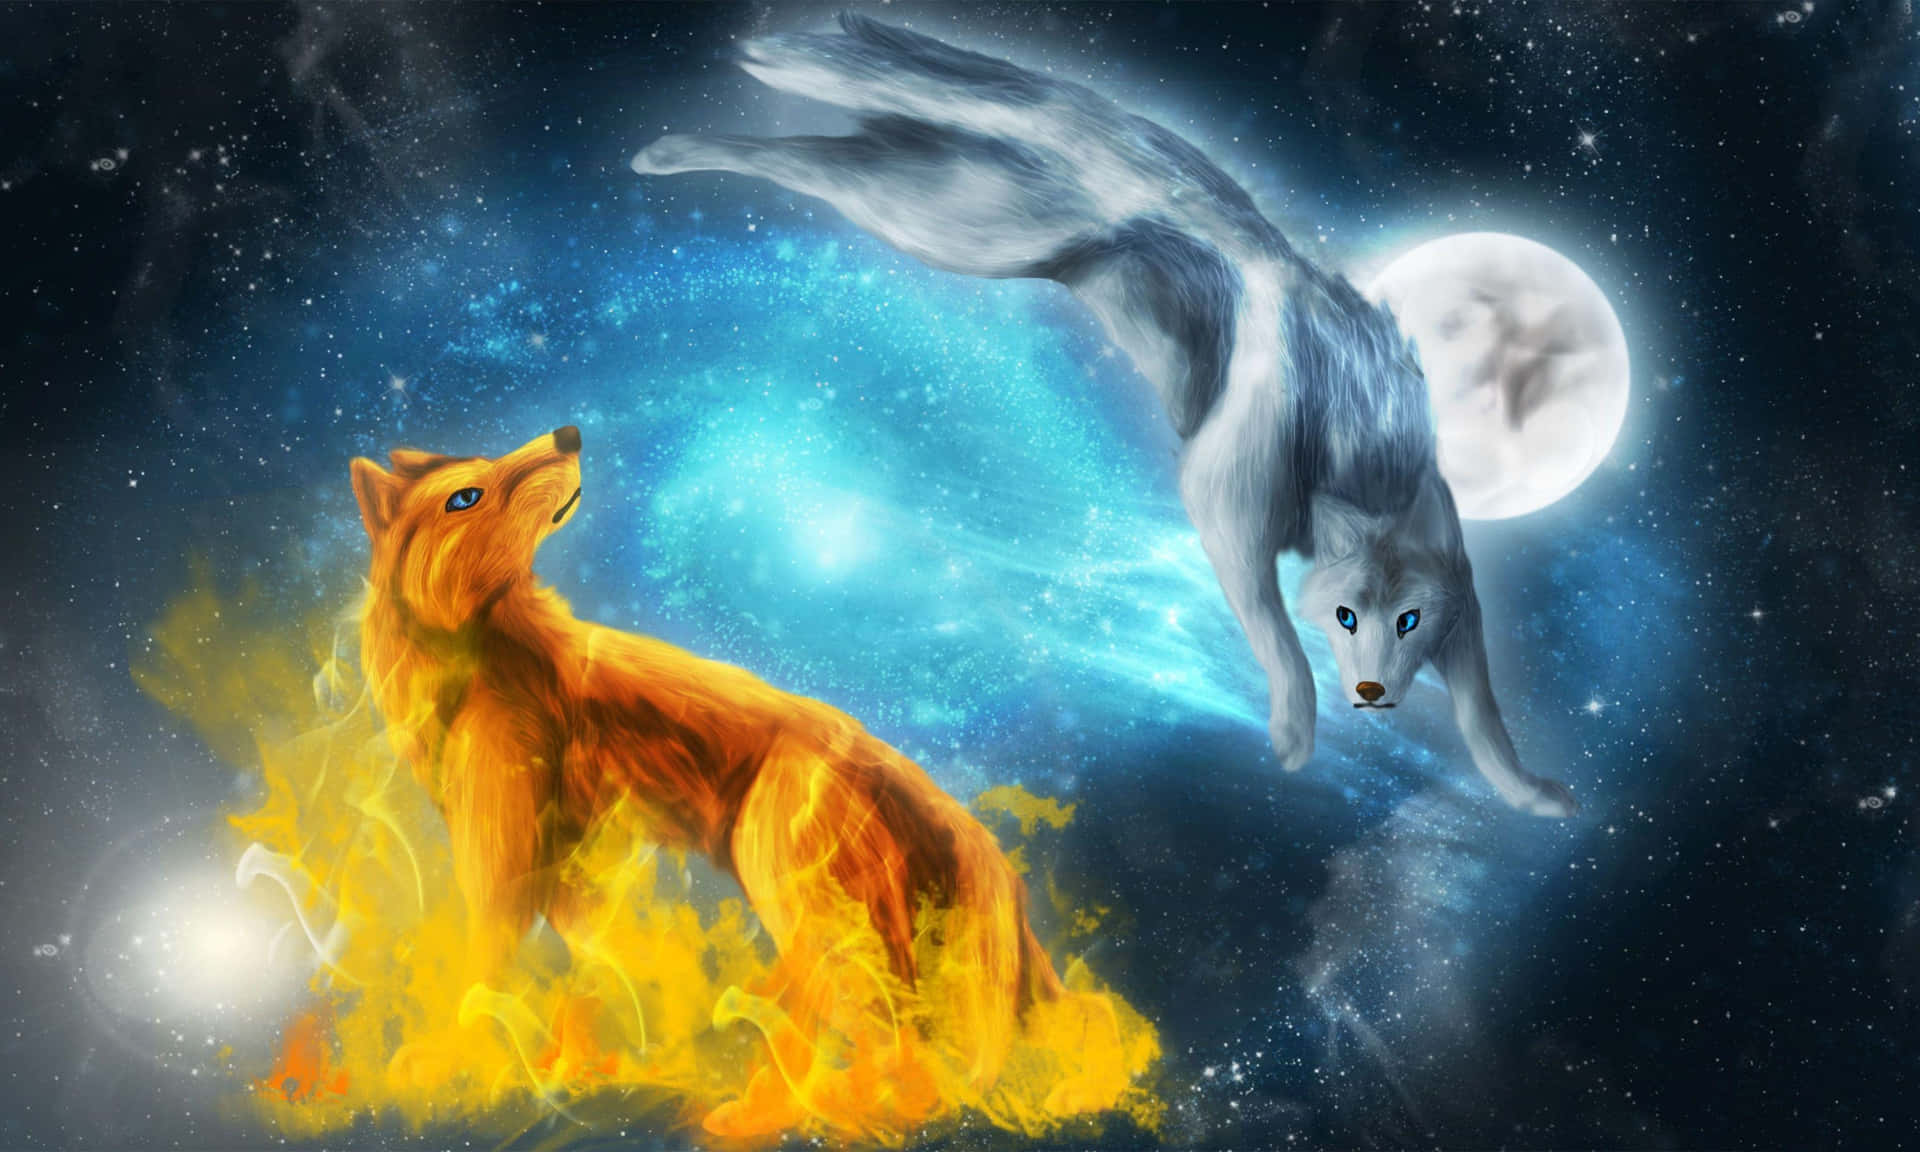 A Mystical Wolf stands watch in the night sky Wallpaper